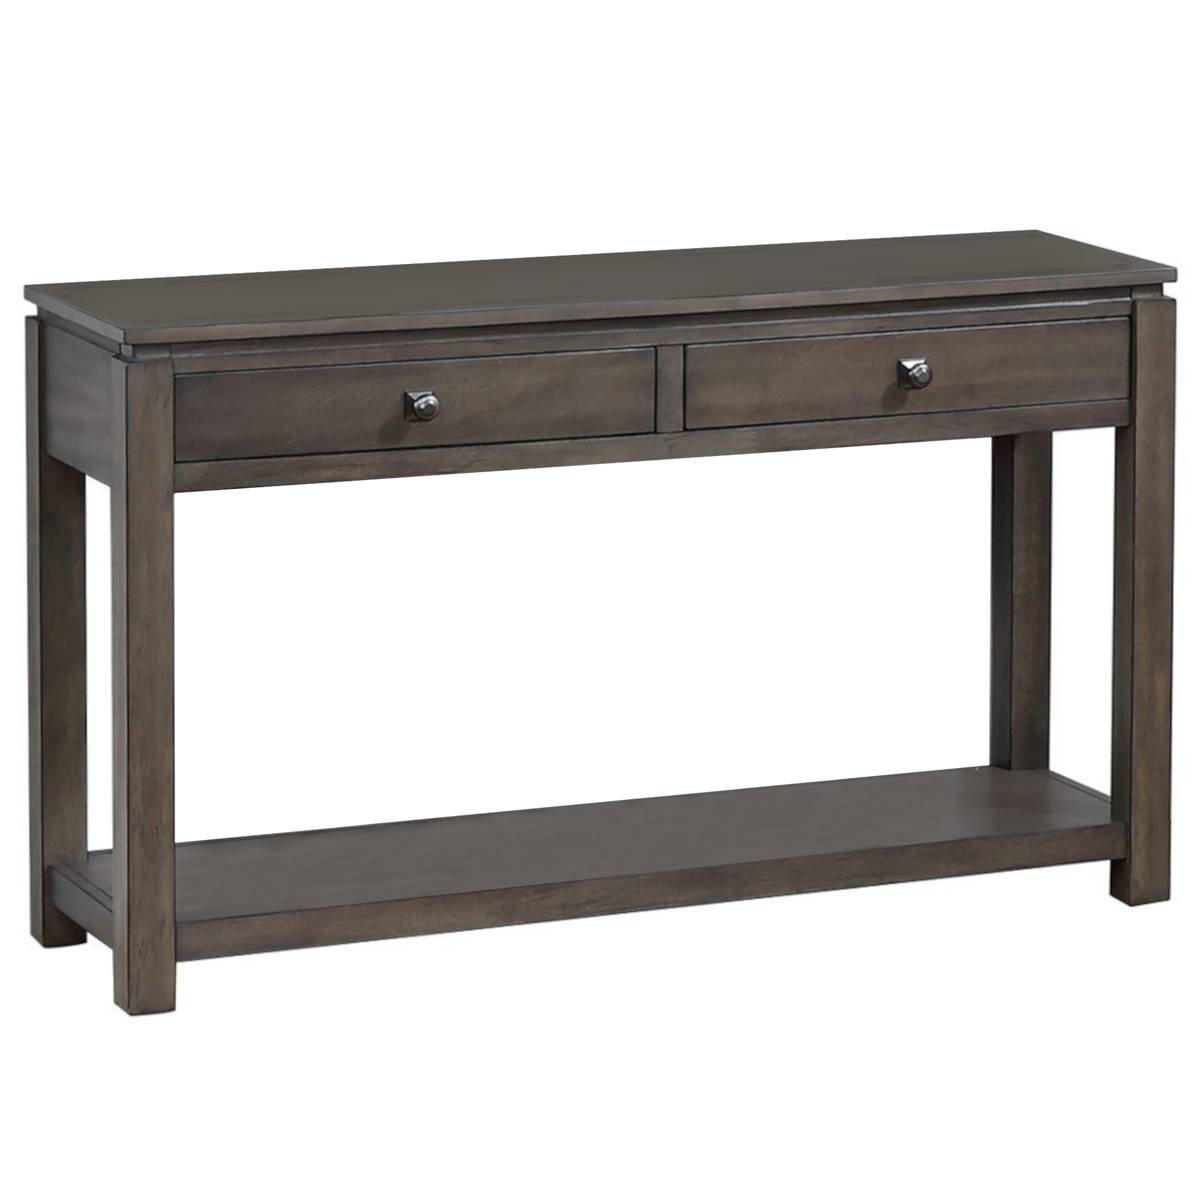 Besthom Shades Of Sand Weathered Wood Console Table